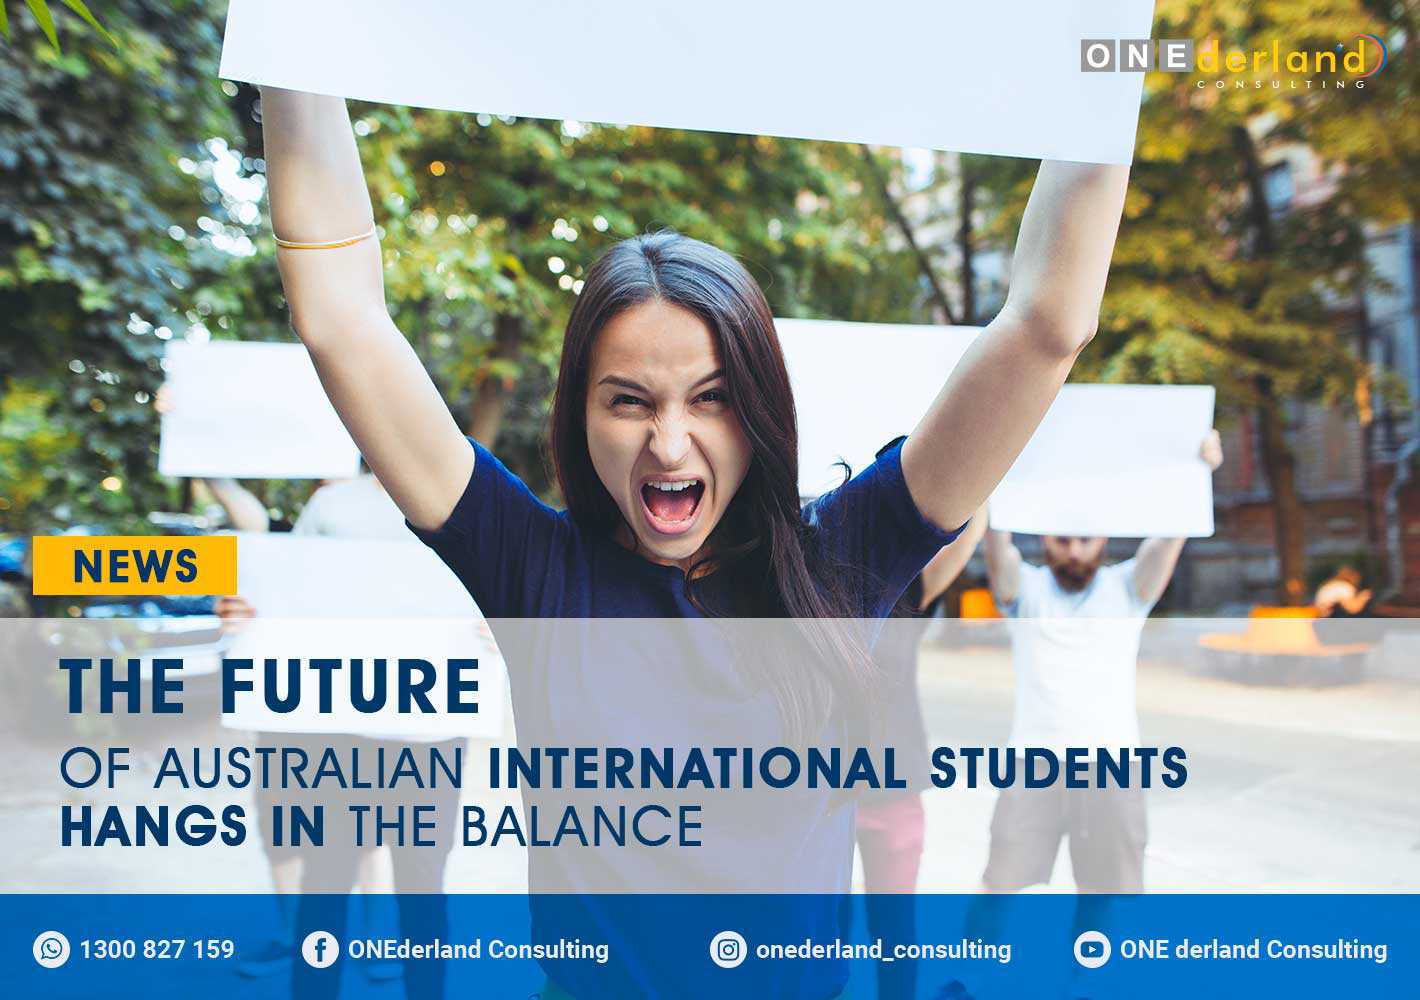 The Future of Australian International Students Hangs in the Balance